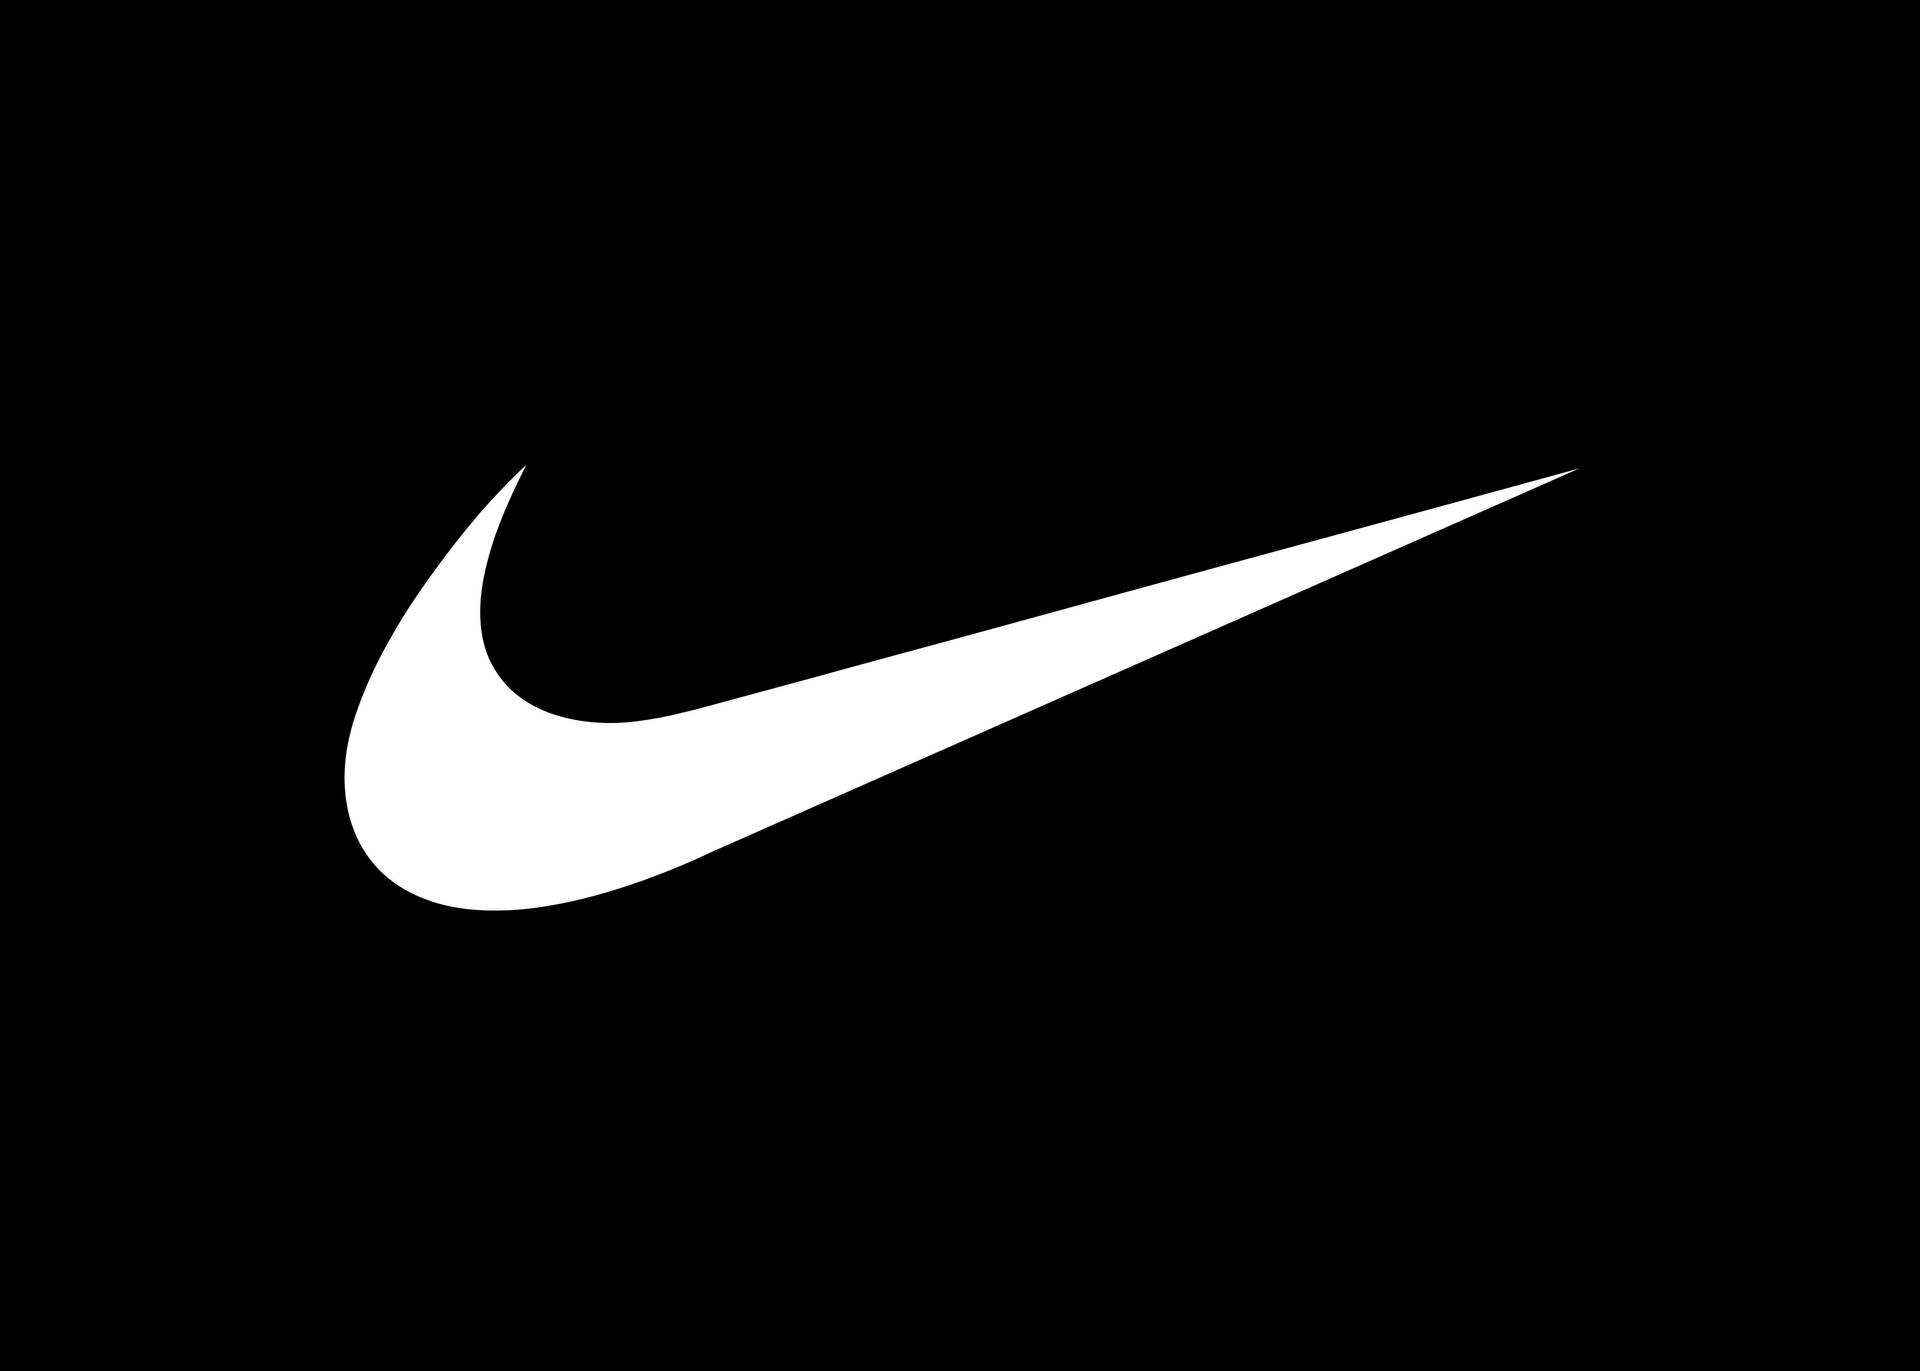 7216X5154 Nike Wallpaper and Background